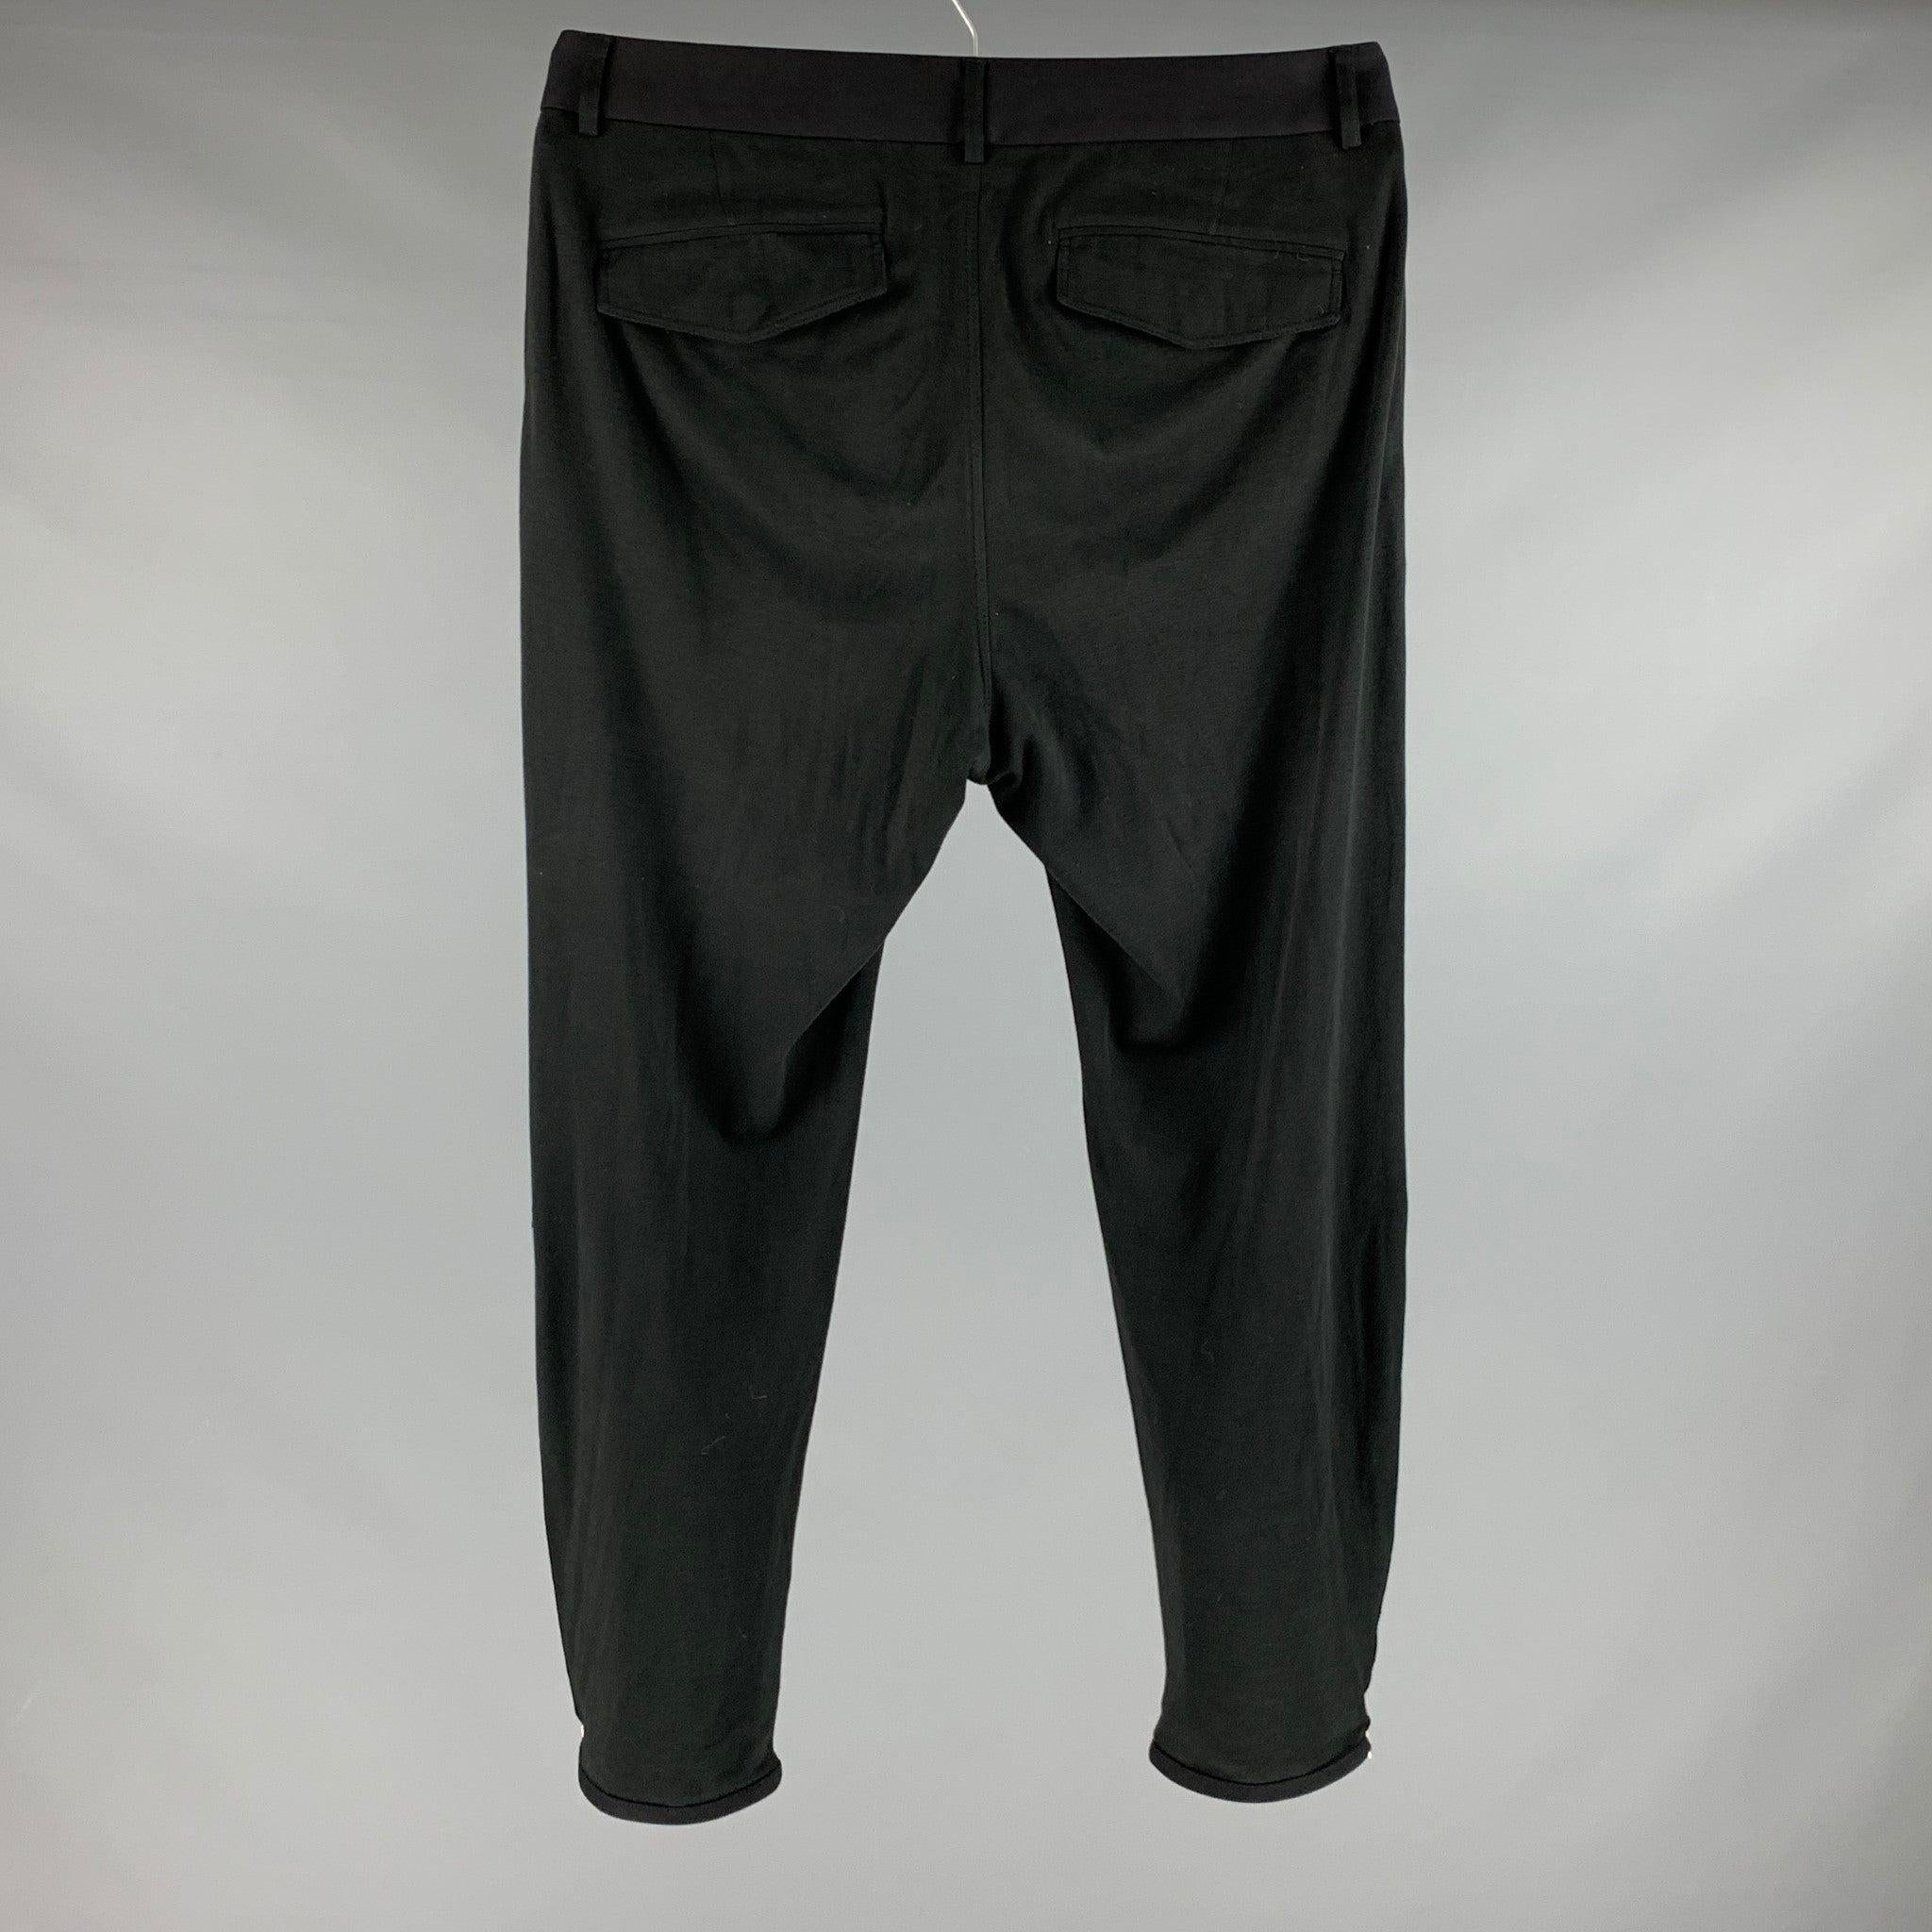 ALEXANDER MCQUEEN Size 32 Black Cotton Cashmere Zip Fly Dress Pants In Good Condition For Sale In San Francisco, CA